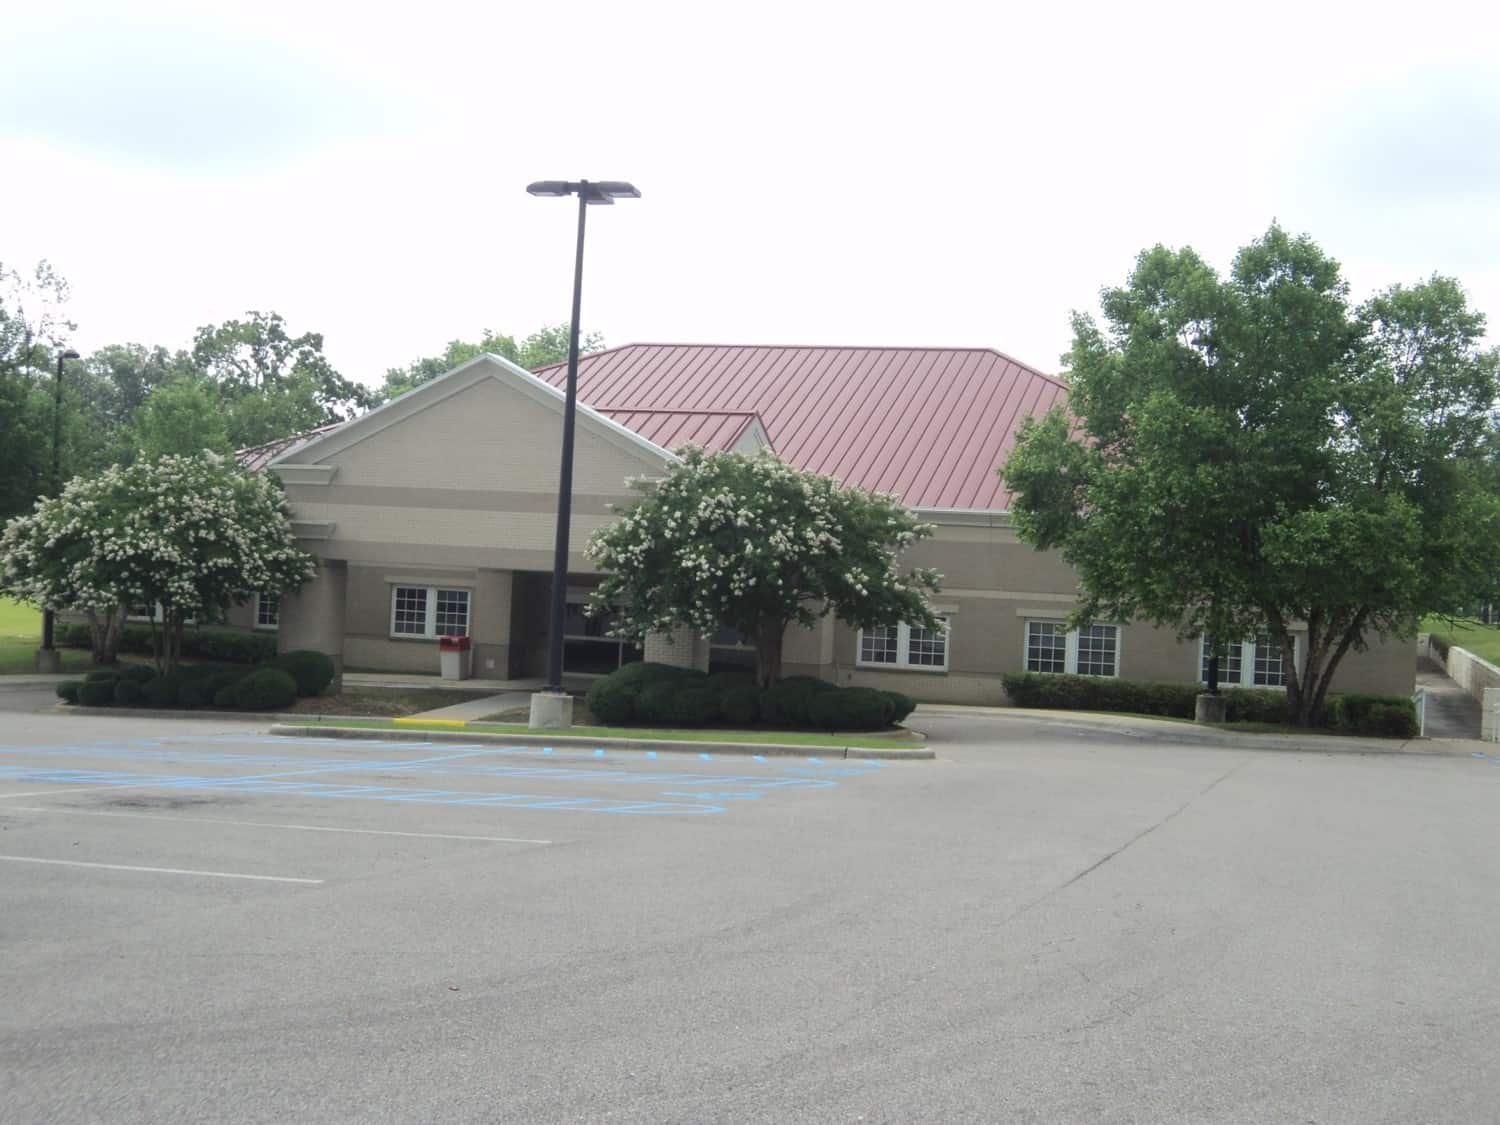 Business Leader Buys Building Near Carraway